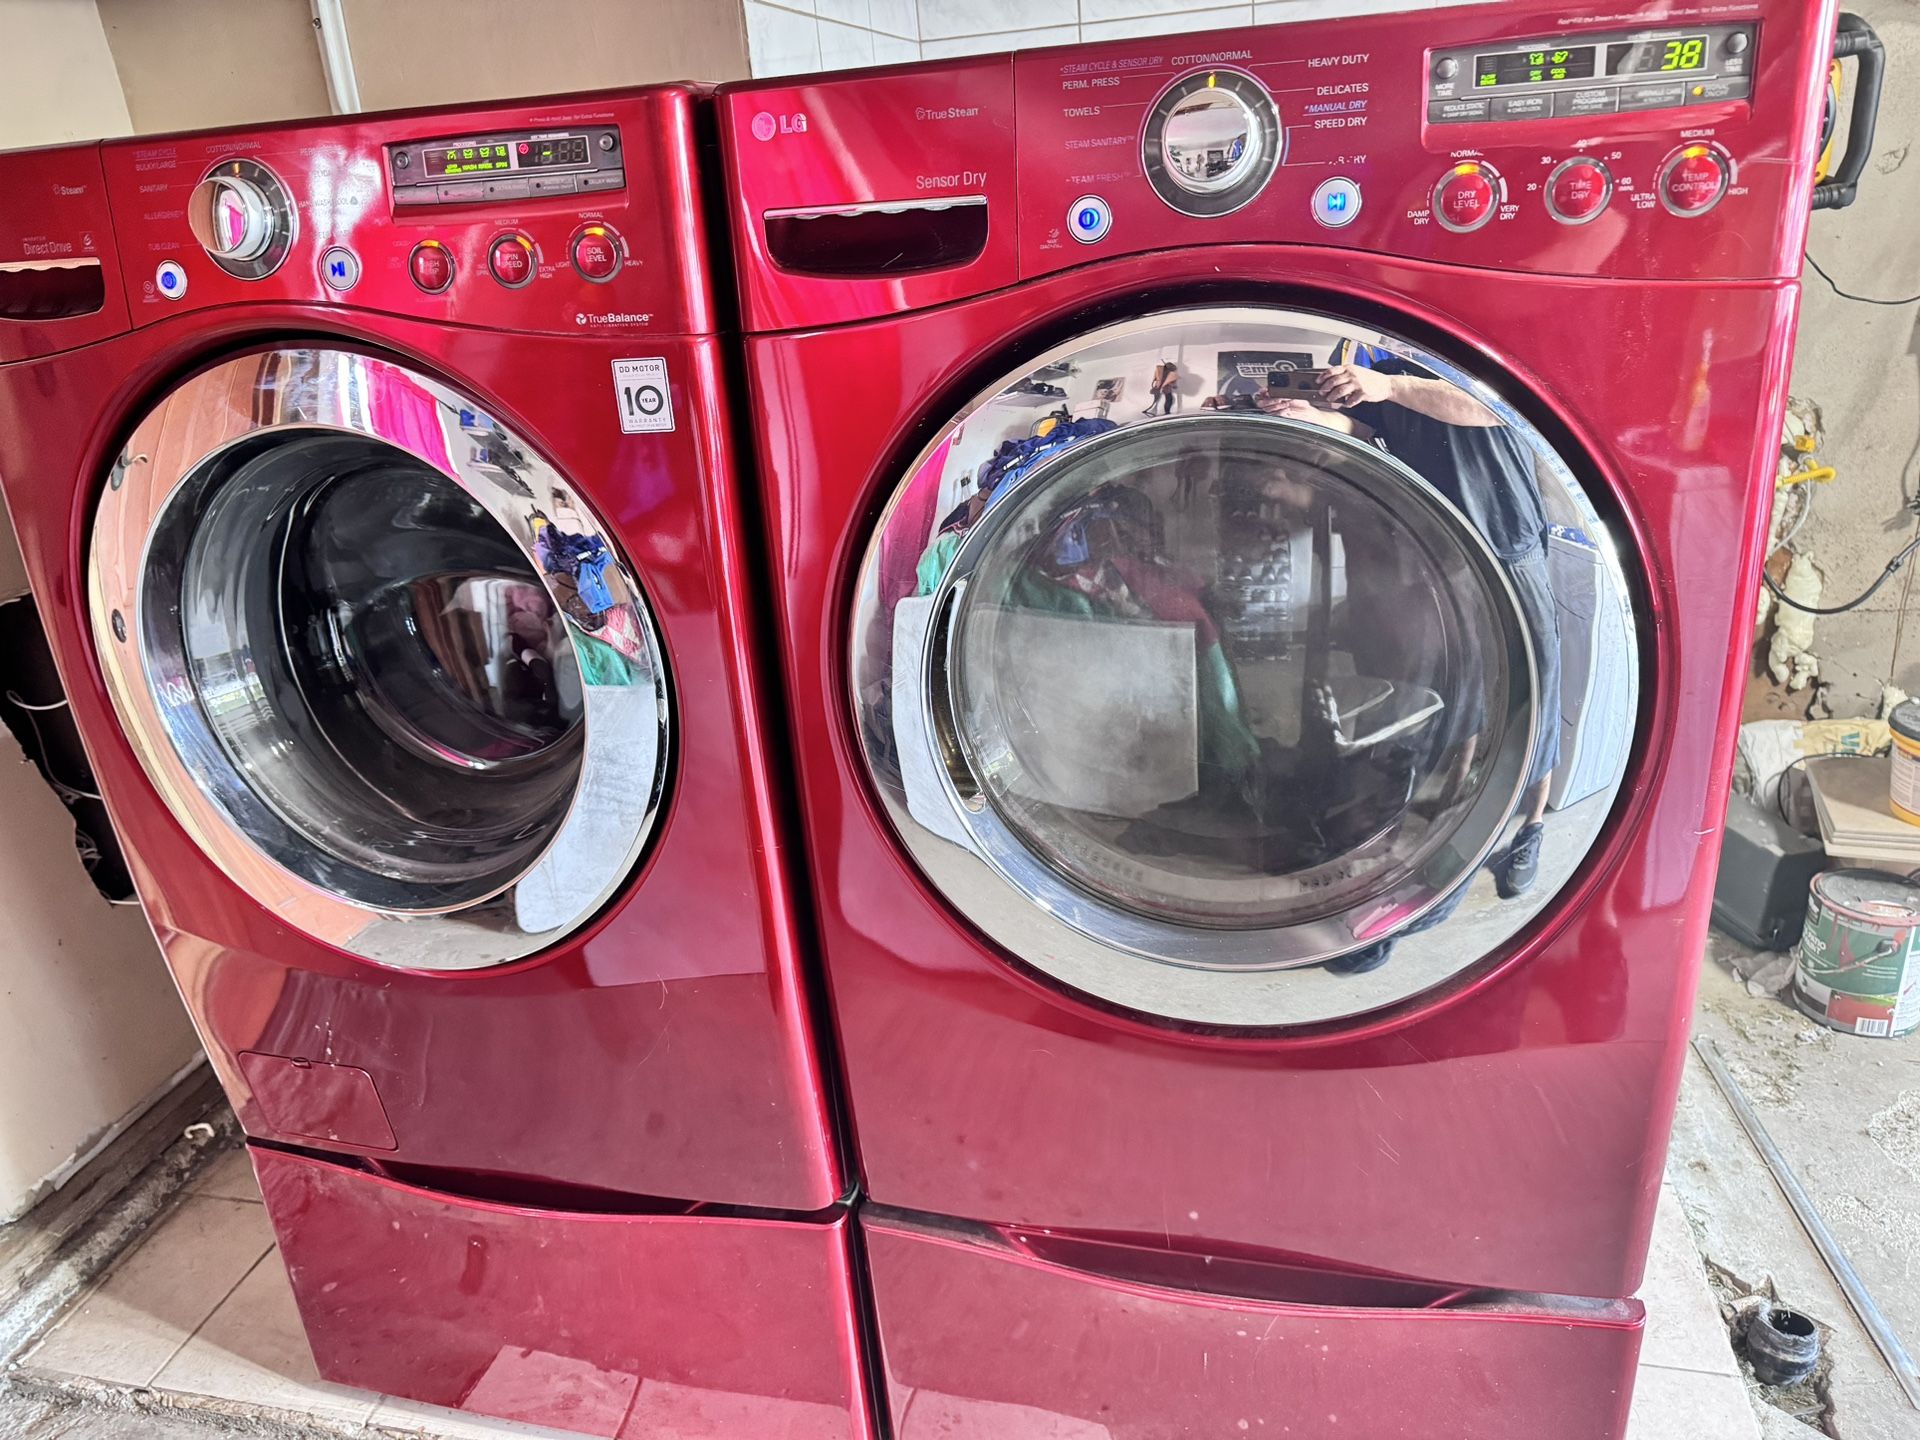 15 month old burgundy LG washer & gas dryer in great conditon both are steam aiption w/ pedestals  washer is a 4.3 cf capacity and dryer is a 7.1 cf c